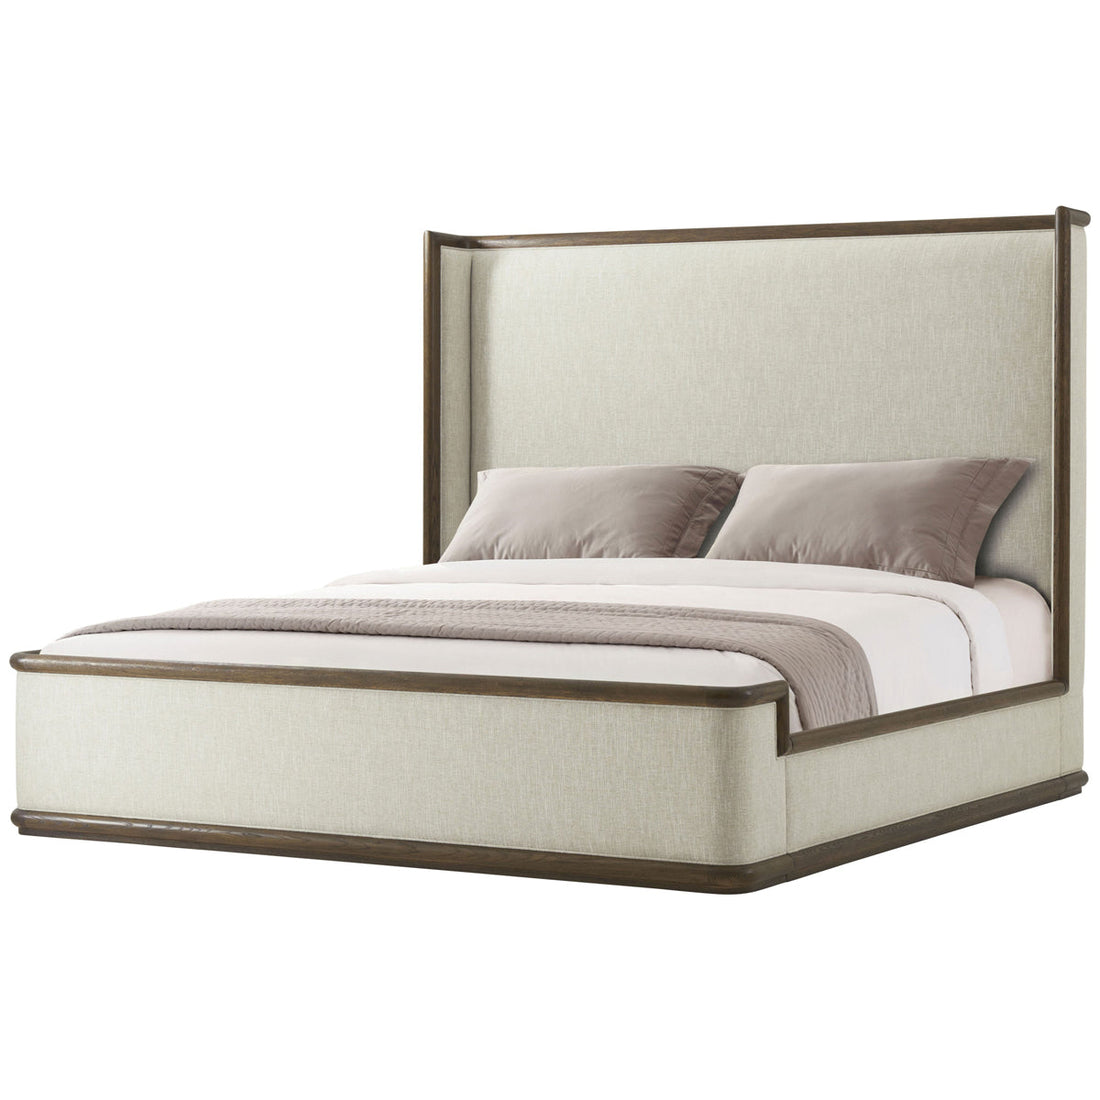 Theodore Alexander Catalina Upholstered US King Bed